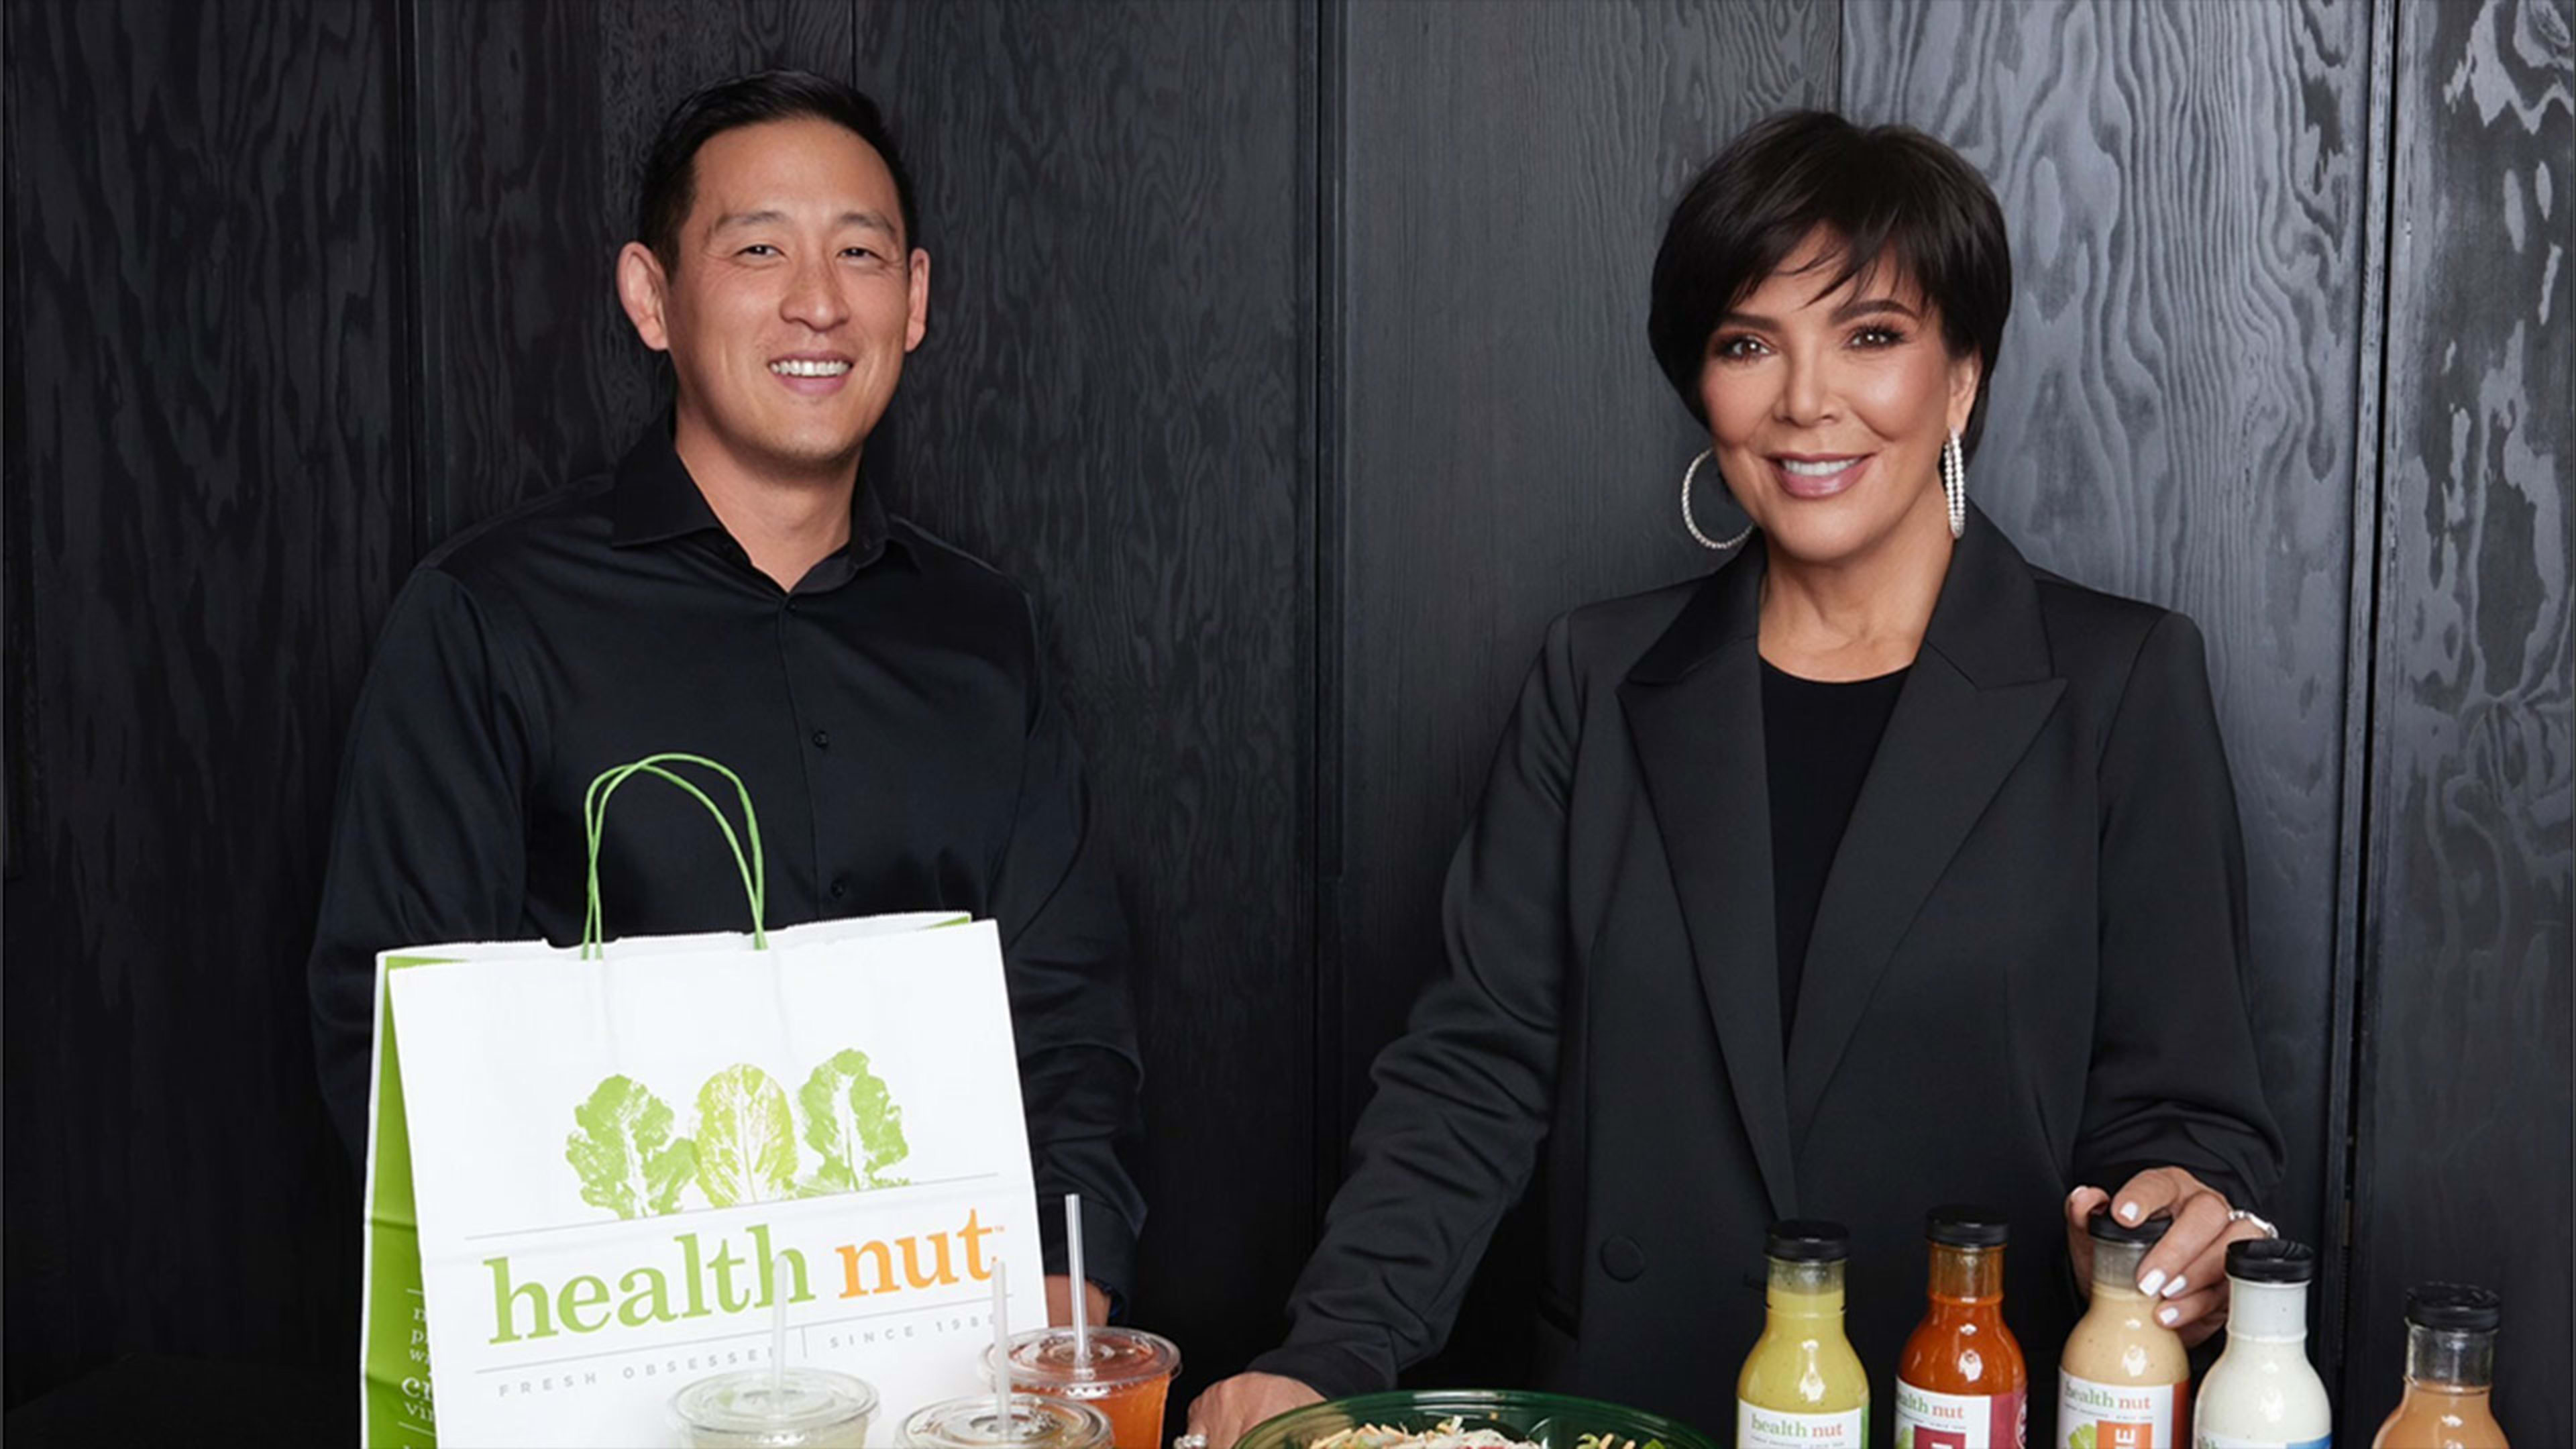 The Kardashians’ favorite salad is about to go global